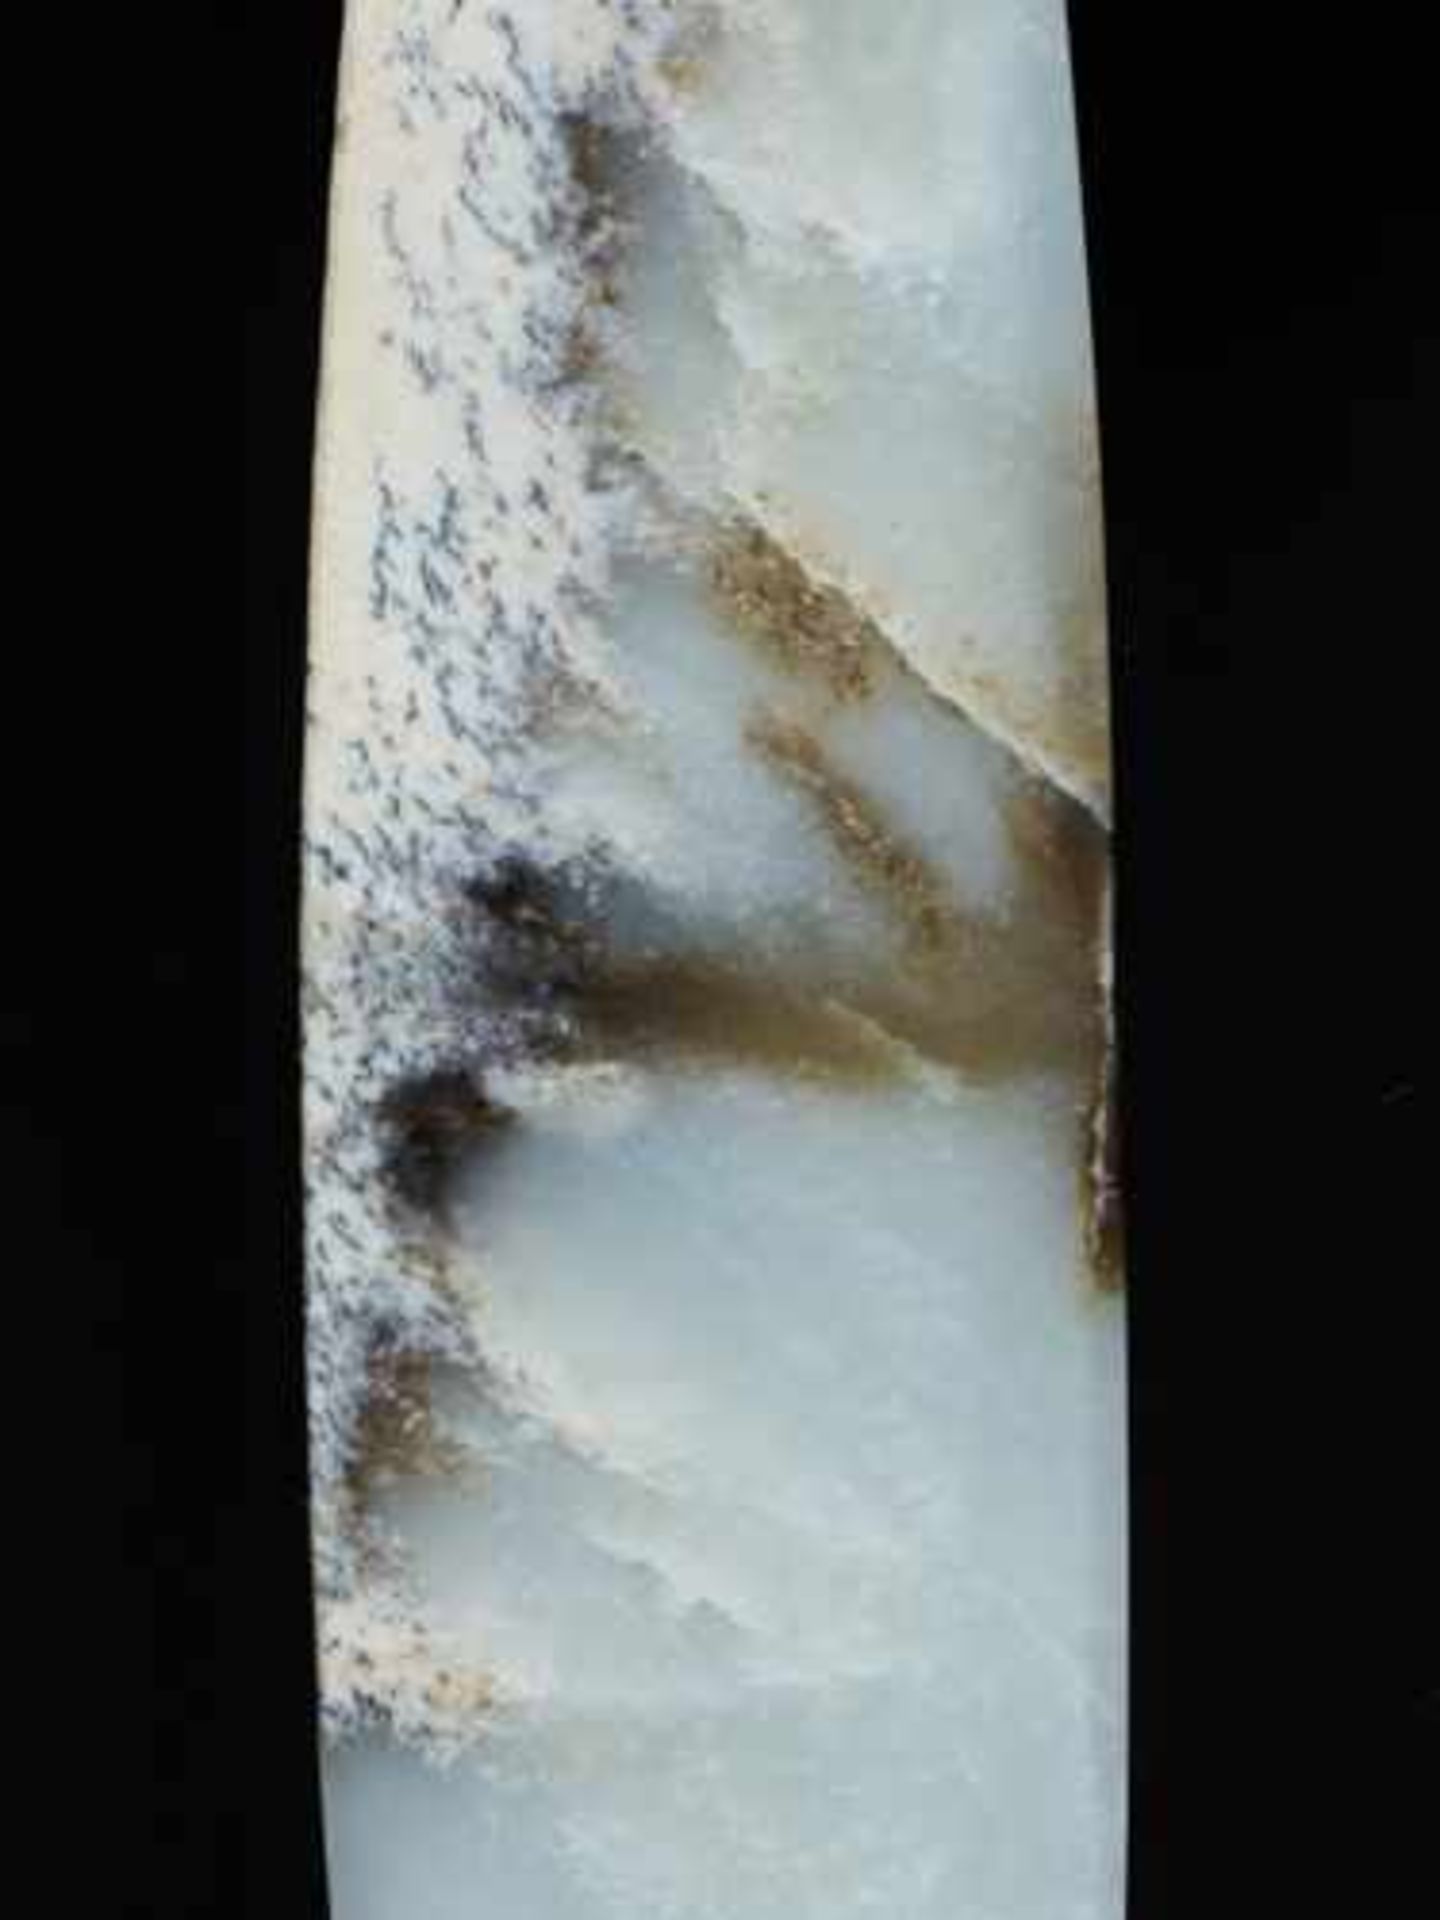 A STRIKING MARBLE-LIKE BEN BLADE IN WHITE JADE Jade, China. Early Bronze Age, Qijia Culture, c. - Image 4 of 7